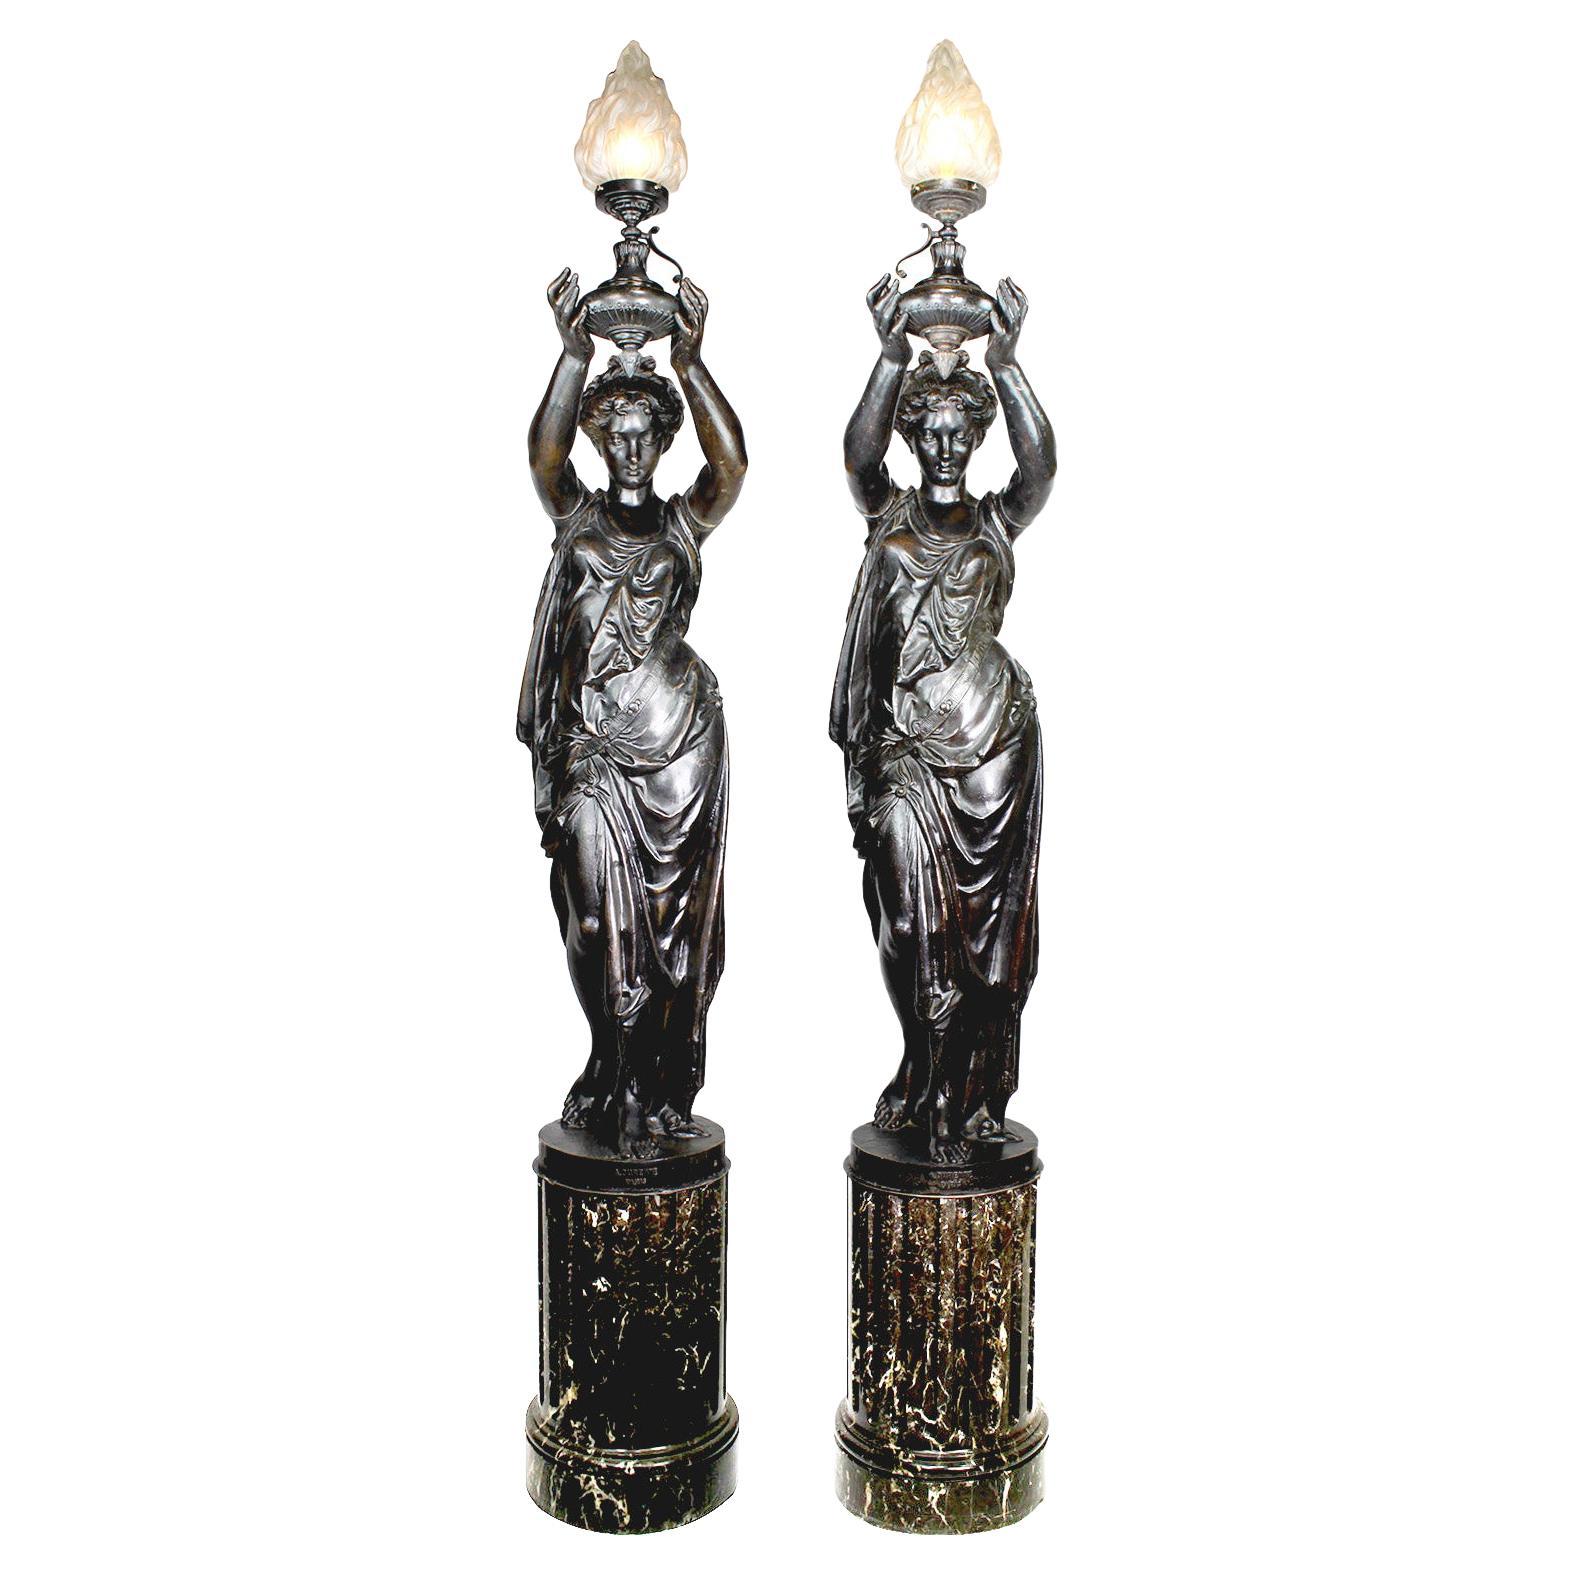 Pair of French 19th-20th Century Neoclassical Style Cast Iron Figural Torchères